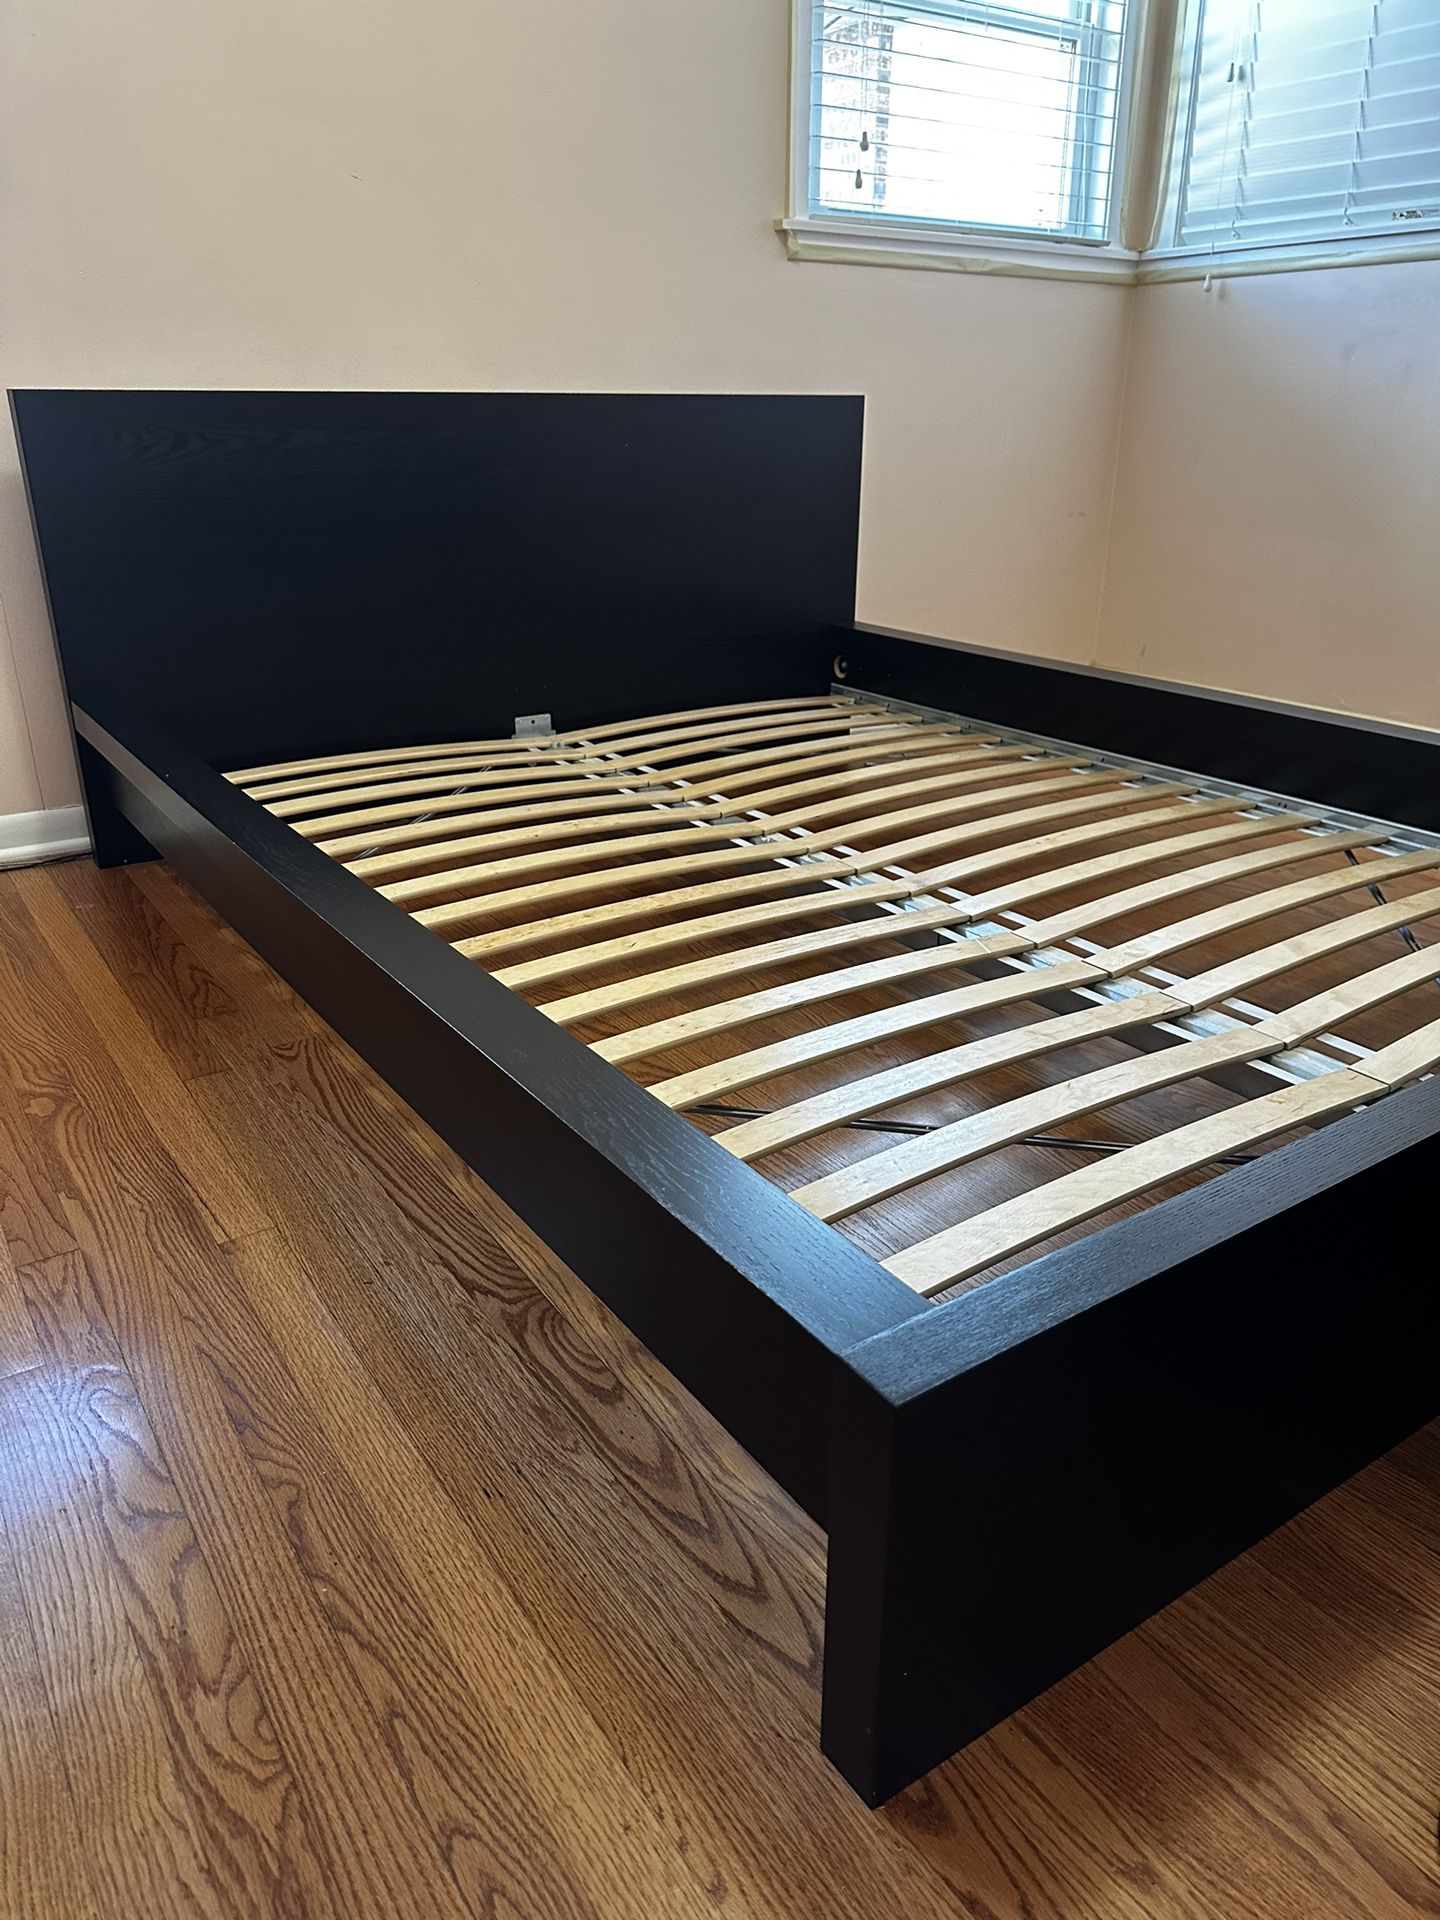 Ikea Malm Queen Bed Frame With LED Light